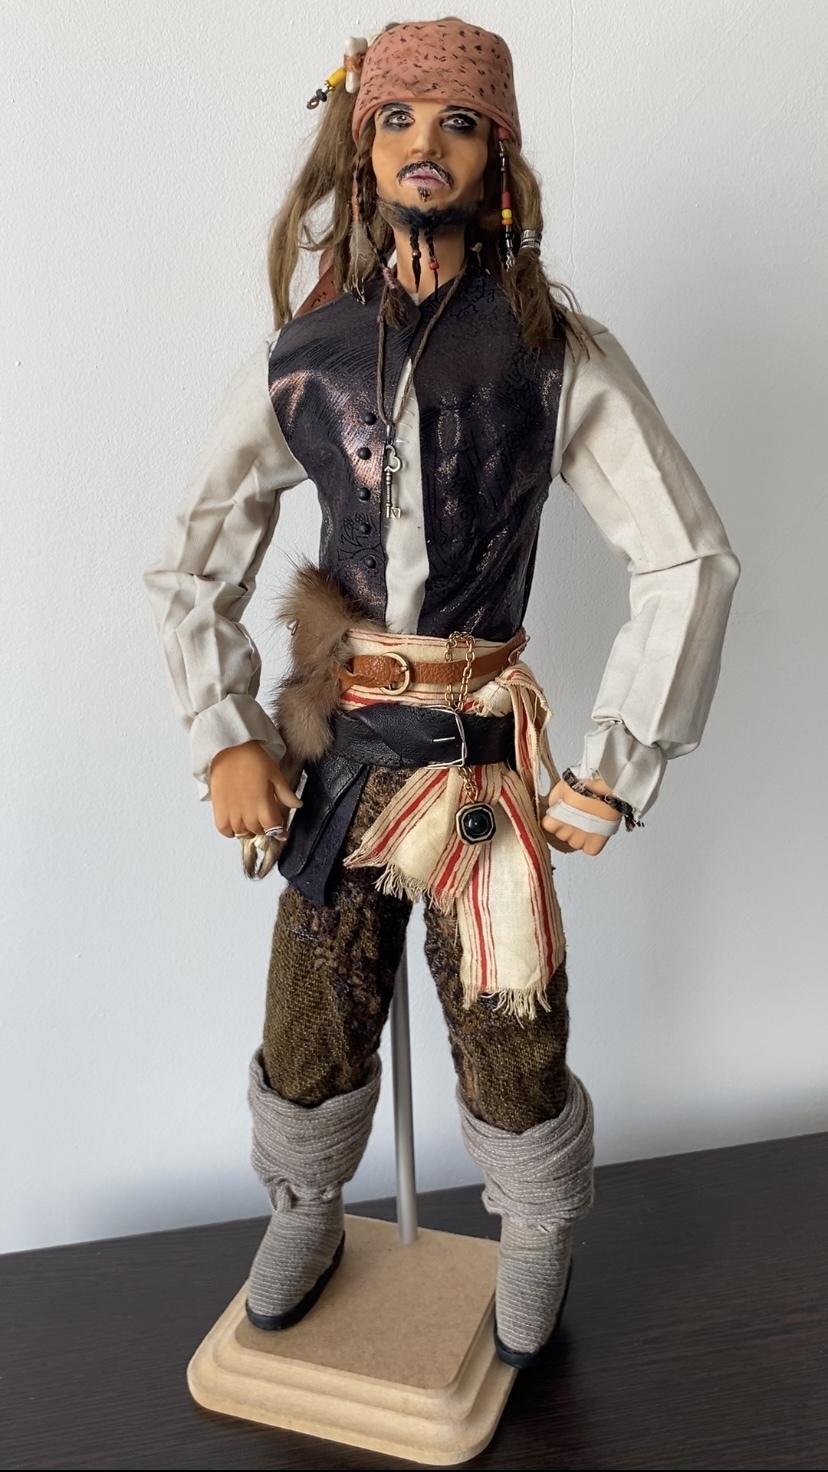 Dolls that are not played with - My, Collecting, Puppets, Handmade, Лепка, Decor, Polymer clay, Captain Jack Sparrow, Chester Bennington, Pennywise, Joker, Mask, Longpost